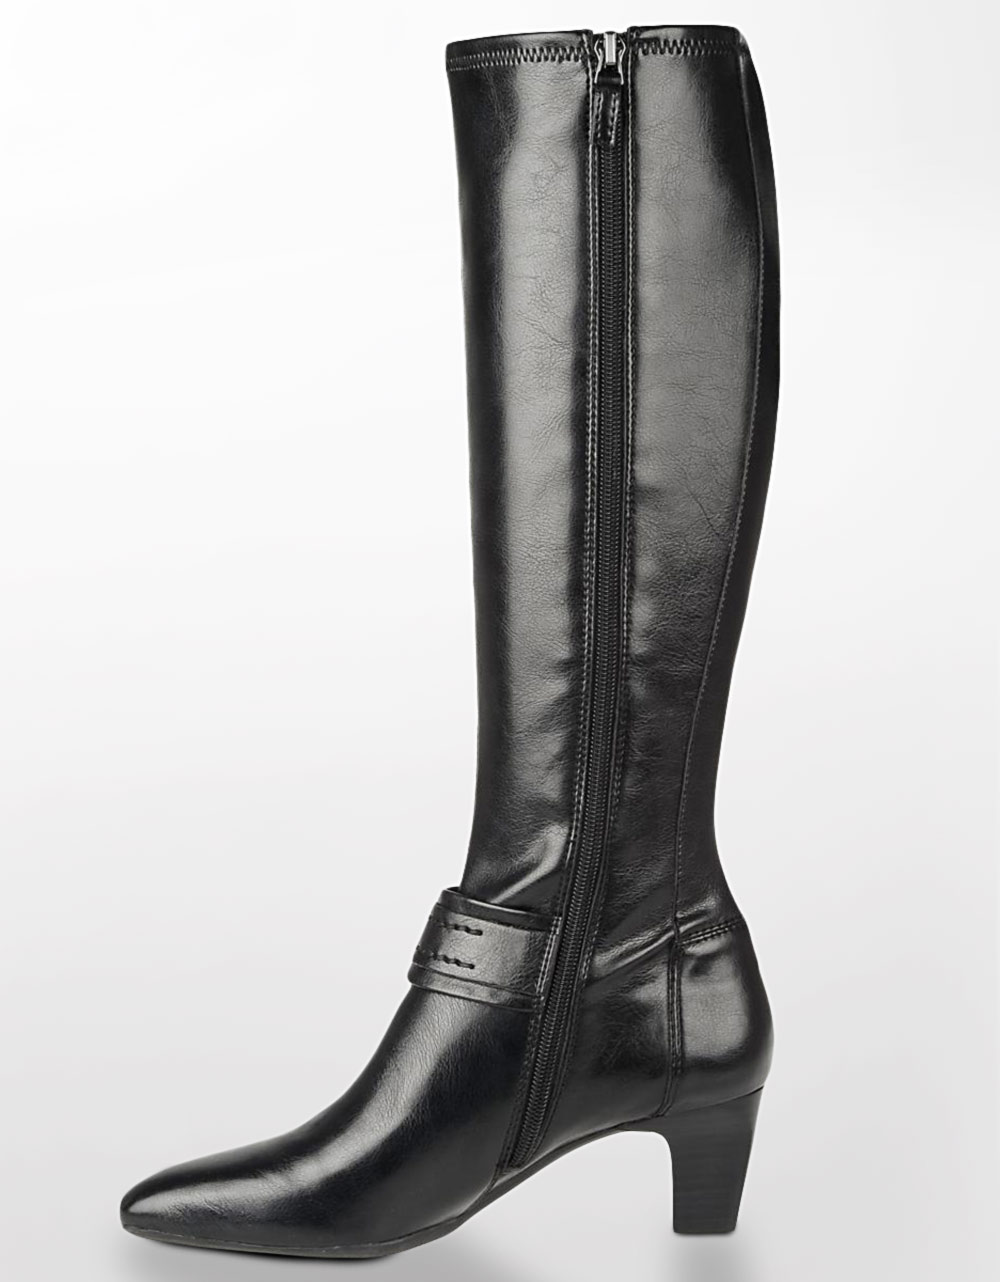 Franco sarto Upton Tall Leather Boots in Black | Lyst